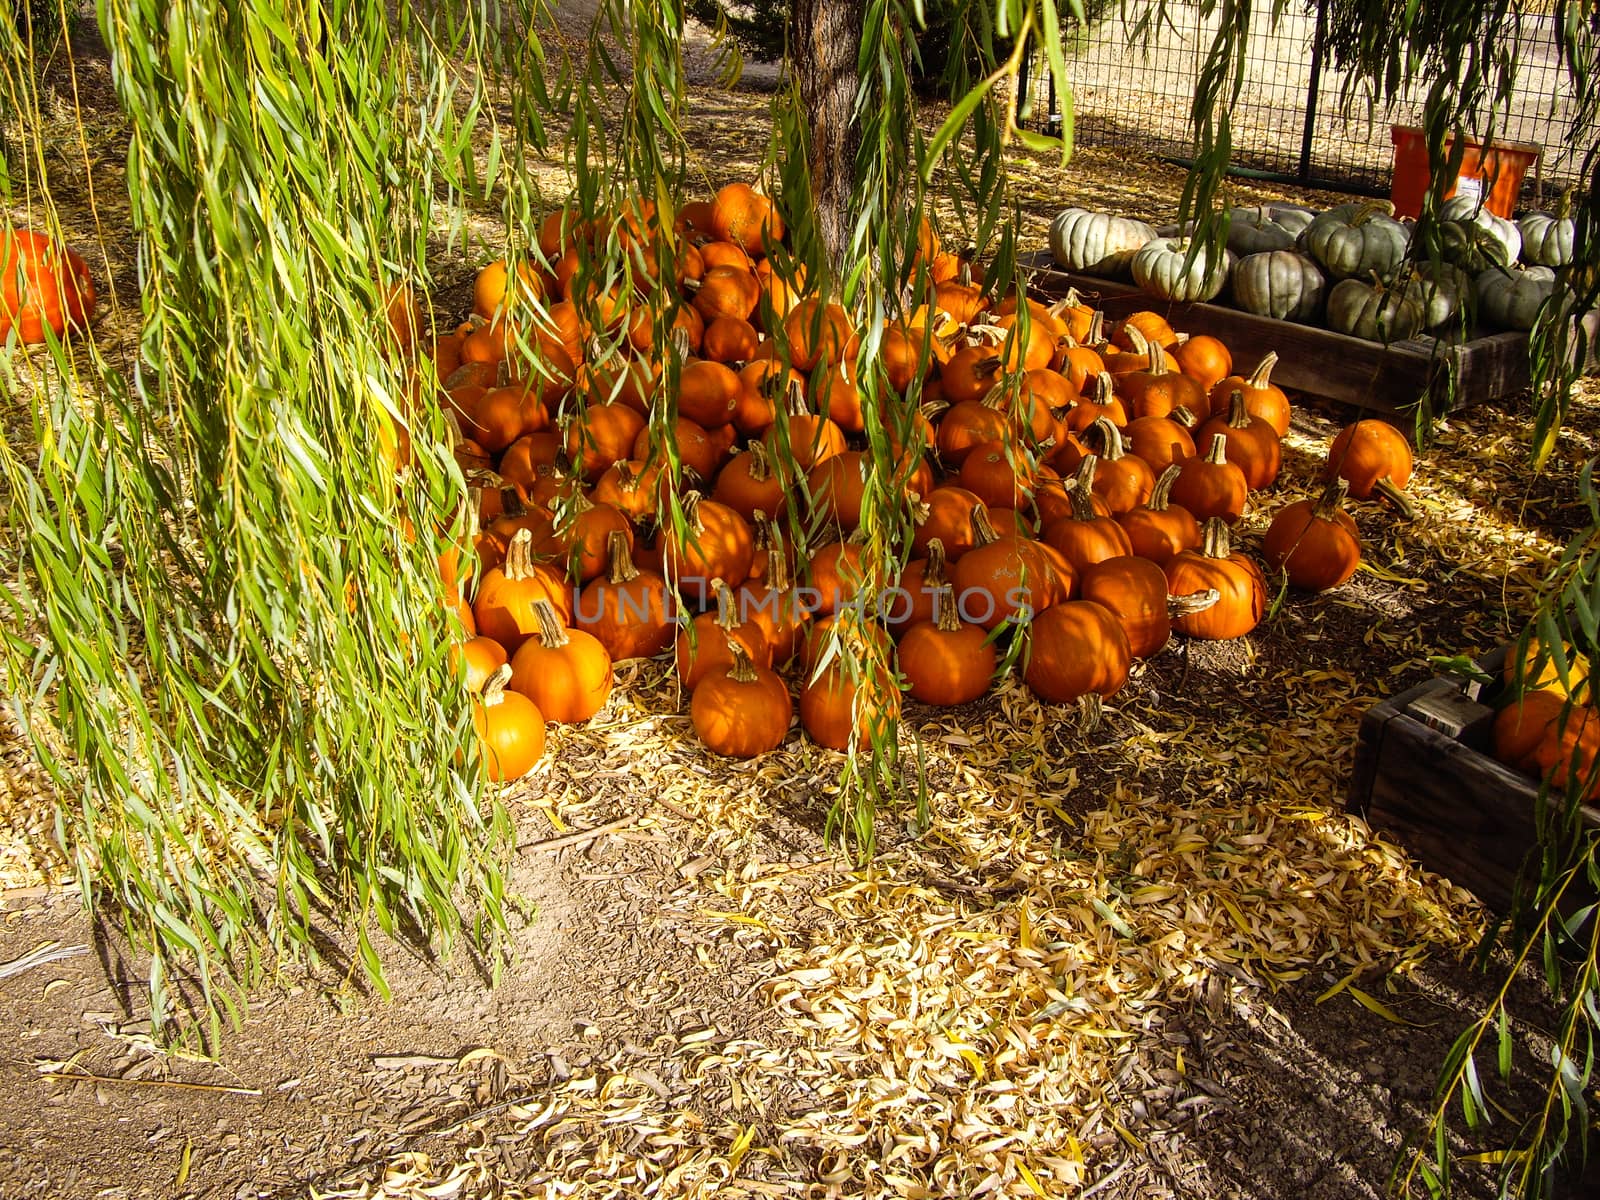 Pumpkins cure in shade of tree by emattil